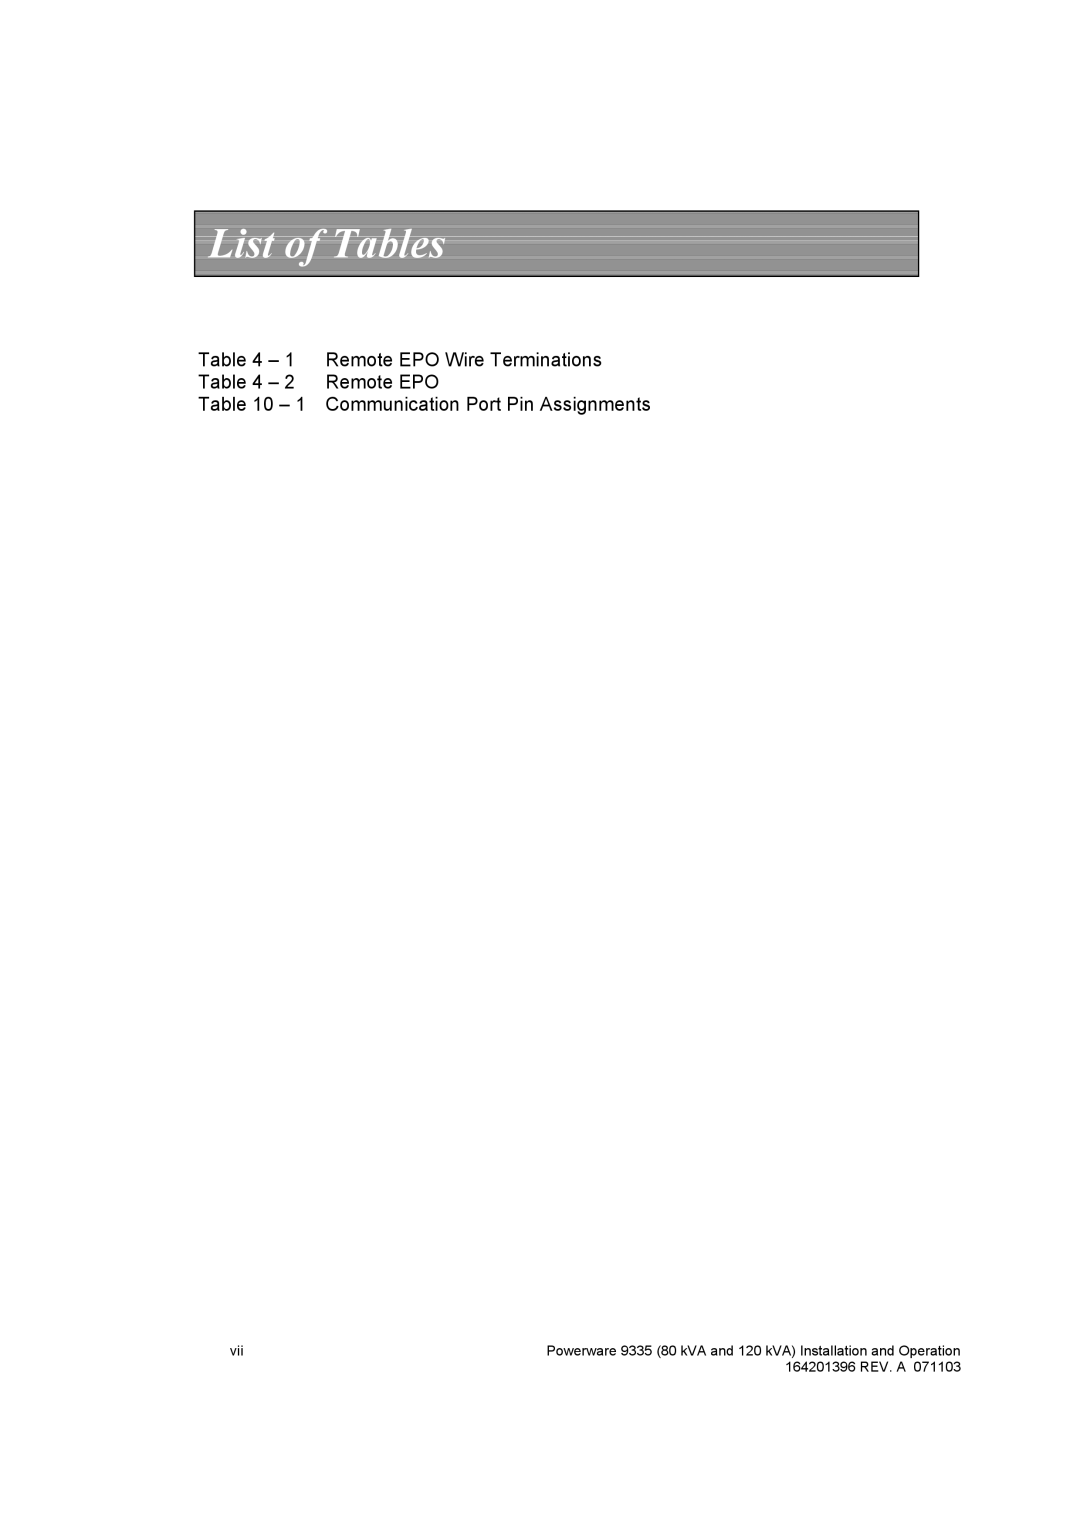 Powerware 9335 operation manual List of Tables 